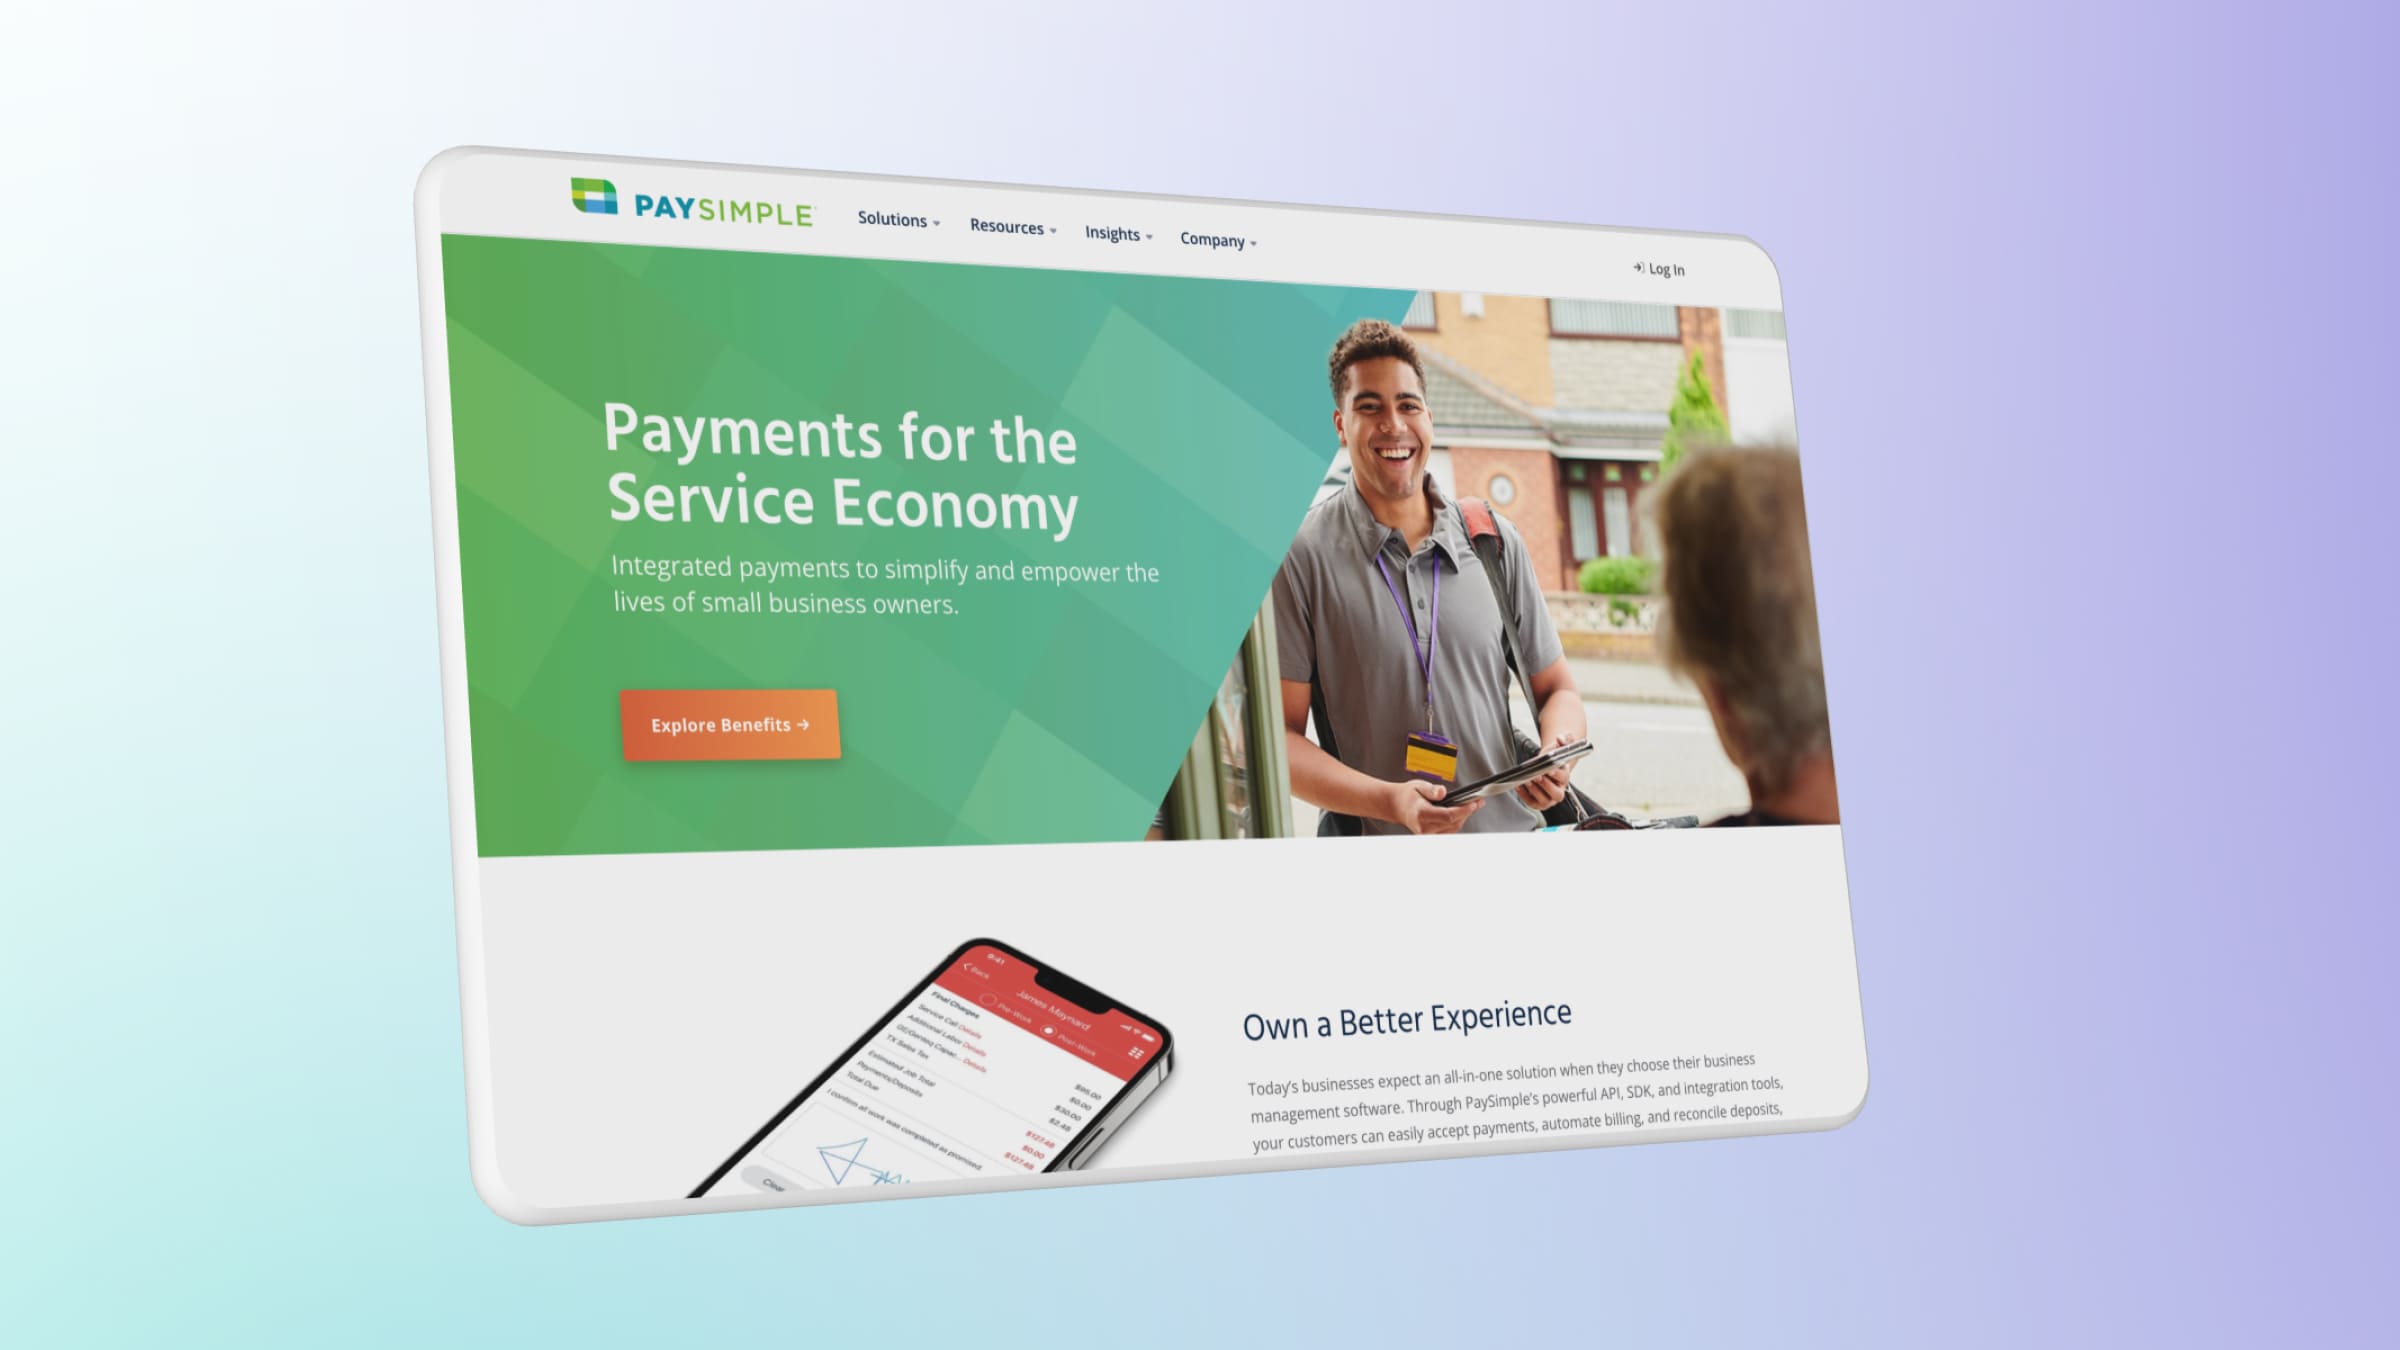 PaySimple is a popular payment system with flexible payment options.